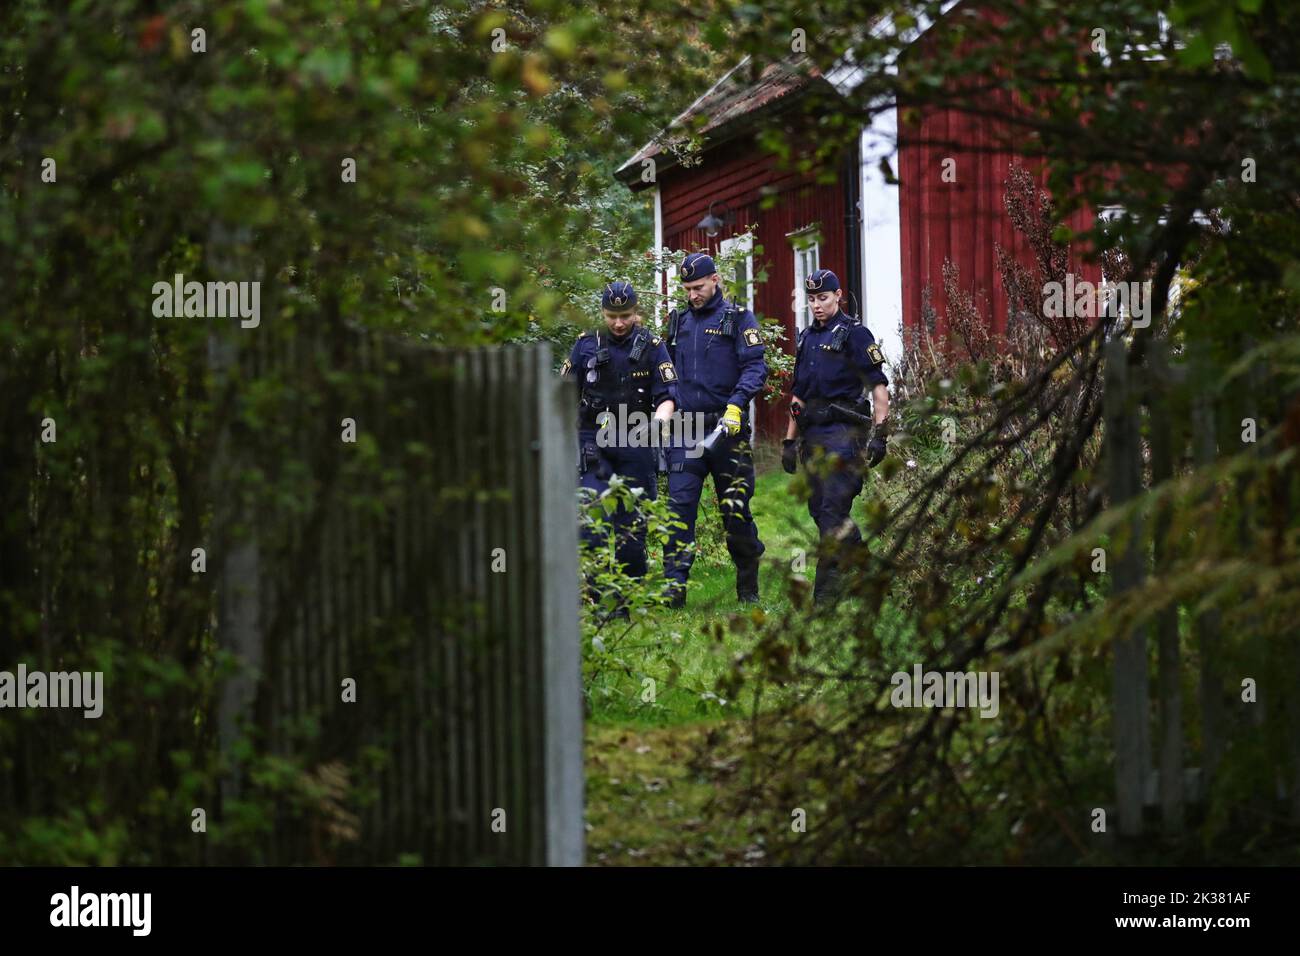 On the night of Sunday, the police were alerted to the municipal border between Motala and Linköping, Sweden. An injured man told the police that he had been kidnapped and managed to escape. Later that night, three people were arrested, suspected of kidnapping. In the picture: Police on site at the house on Sunday afternoon. Stock Photo